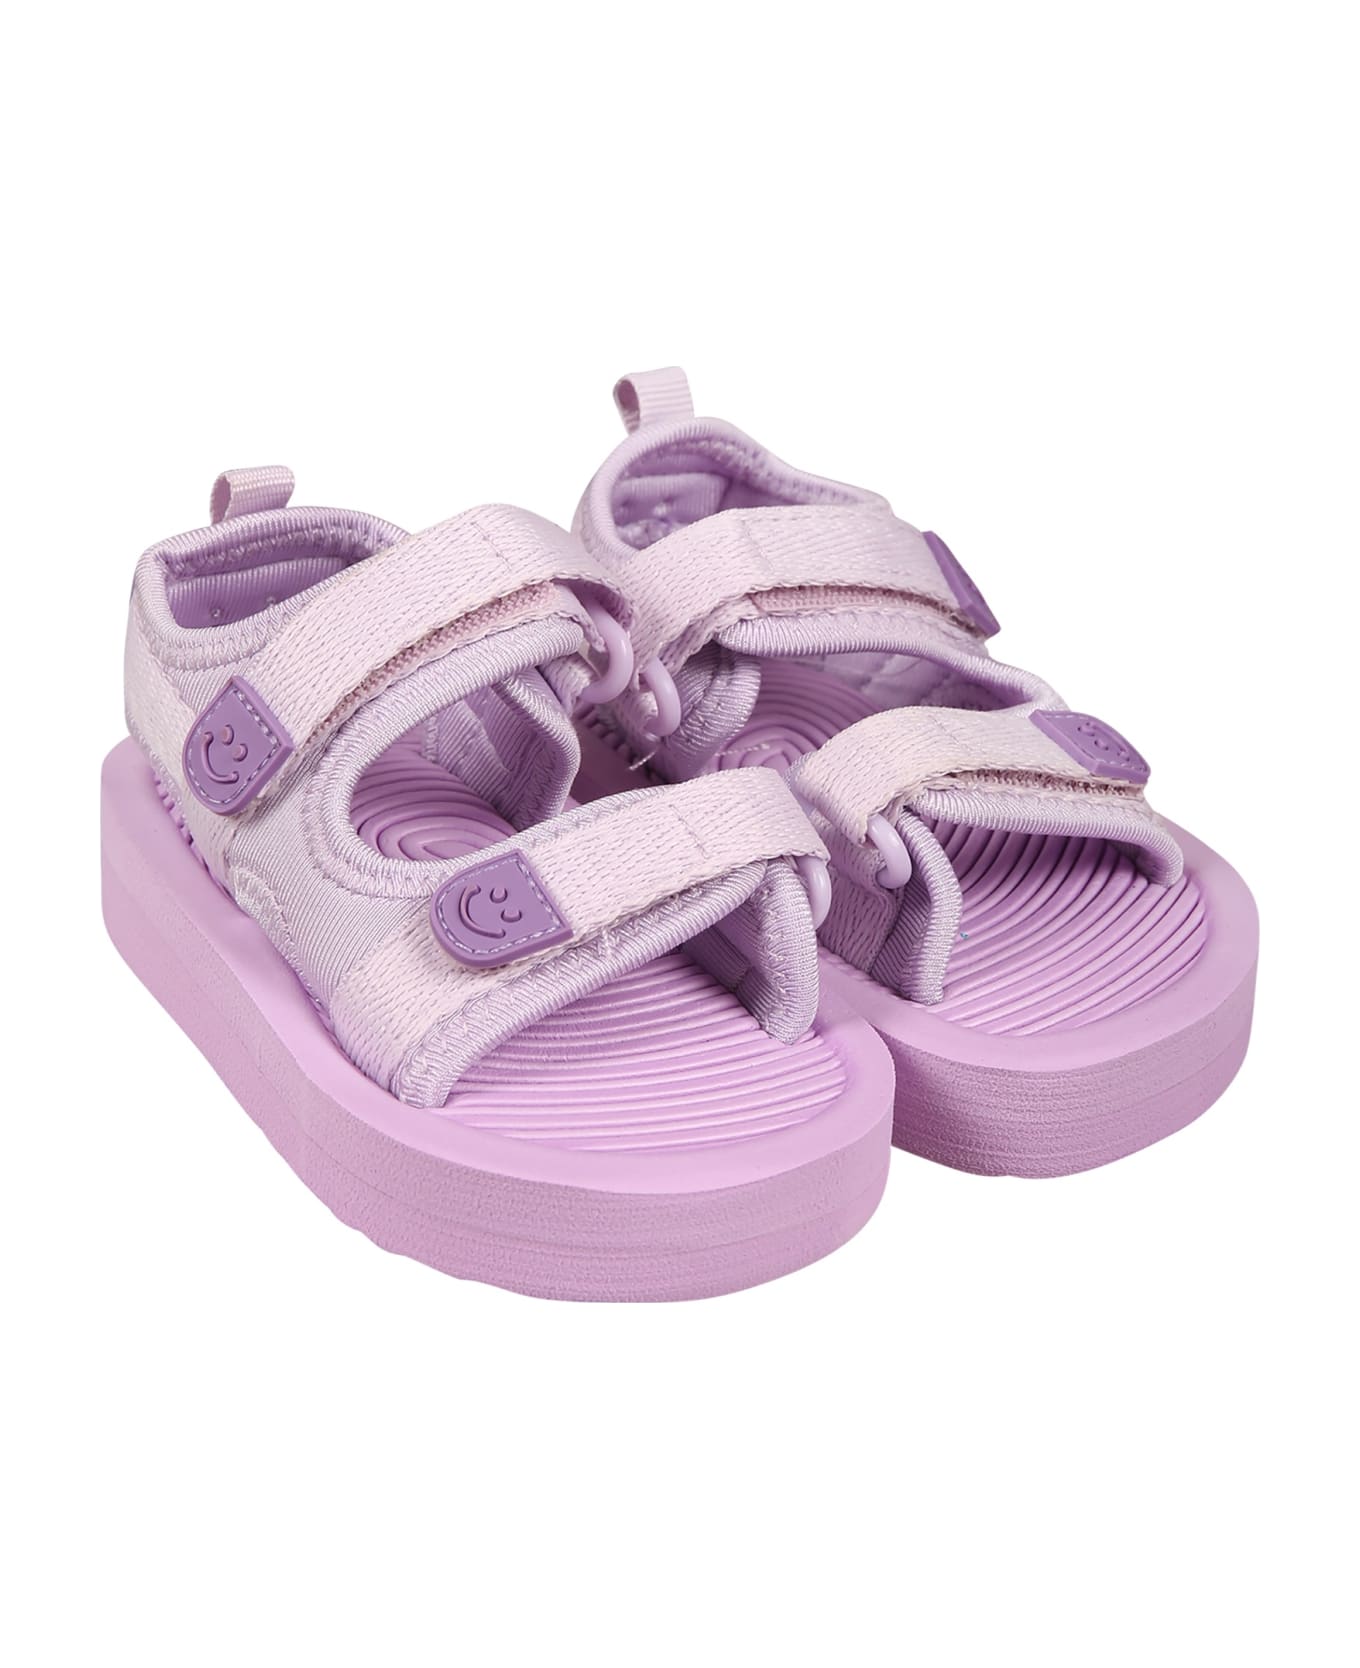 Molo Purple Sandals For Baby Girl With Logo - Violet シューズ